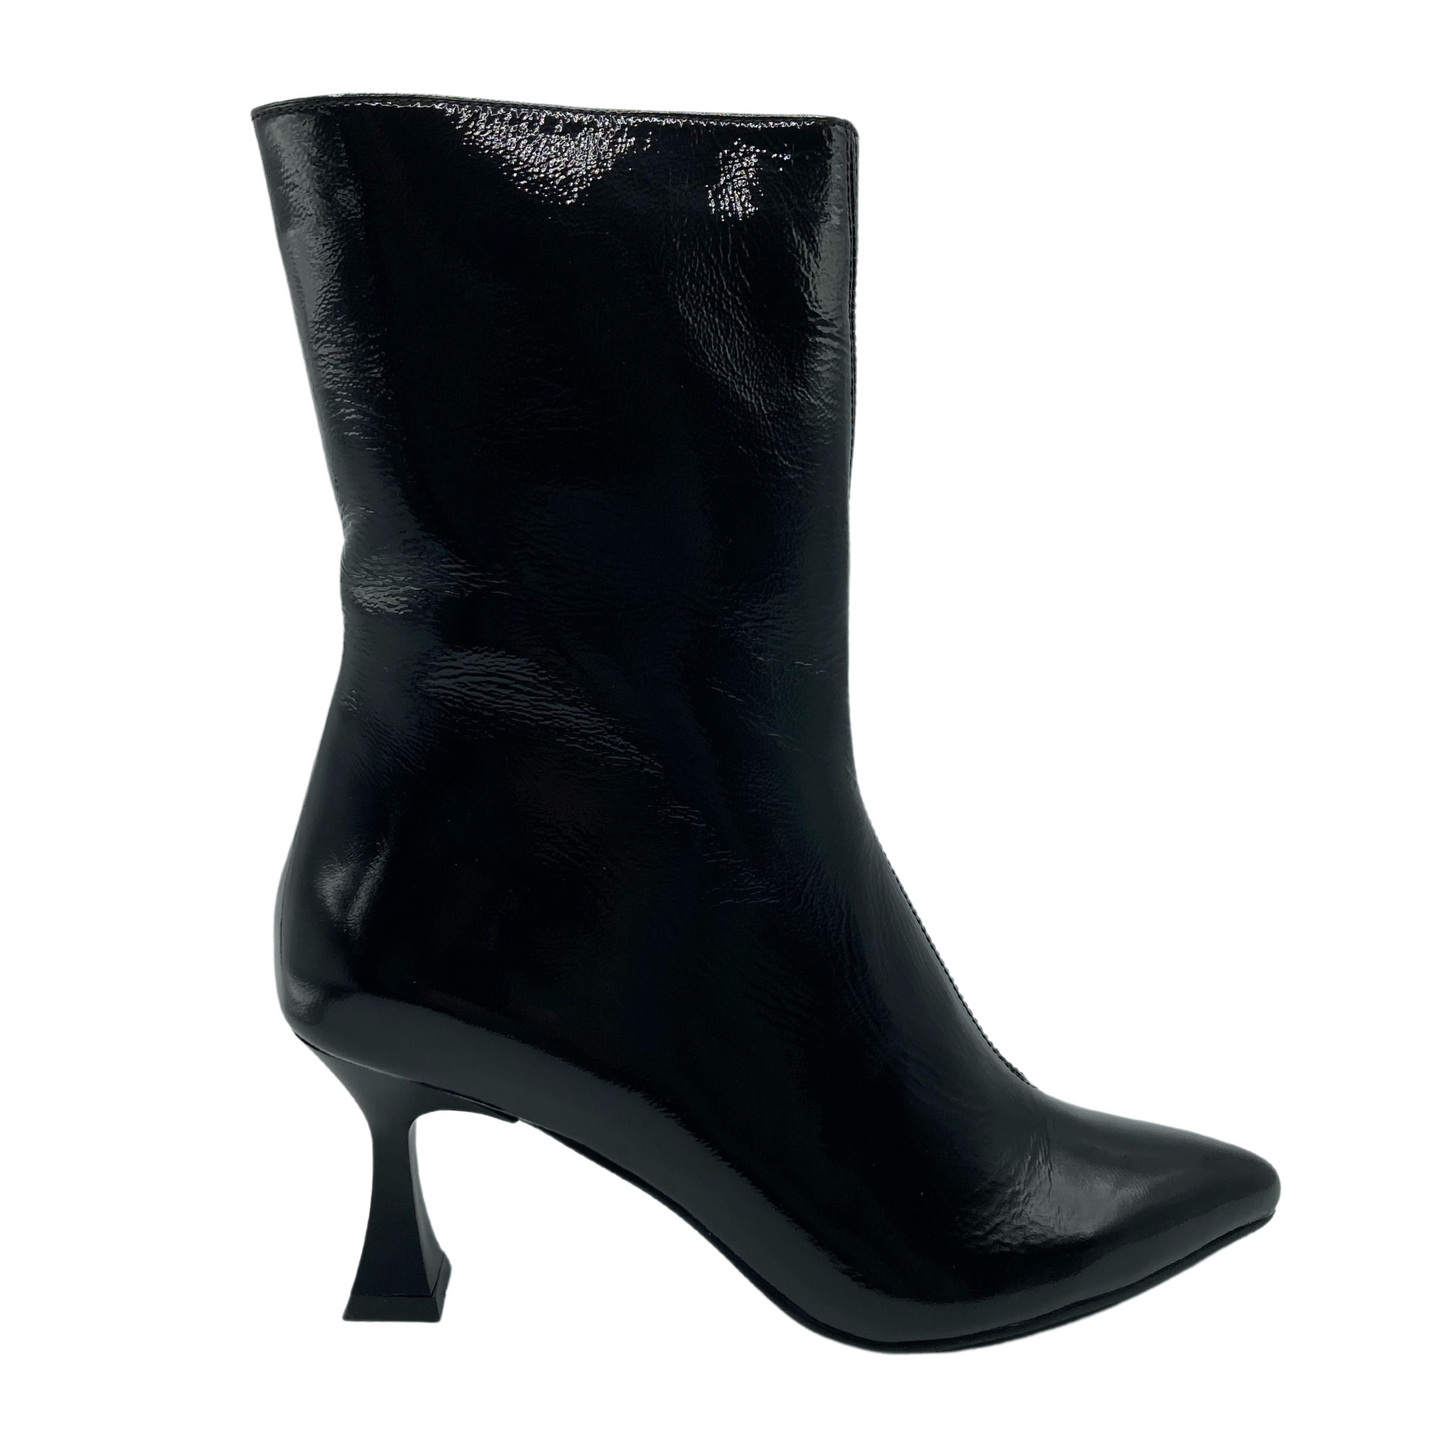 Right facing view of patent leather short boot with pointed toe and flared heel